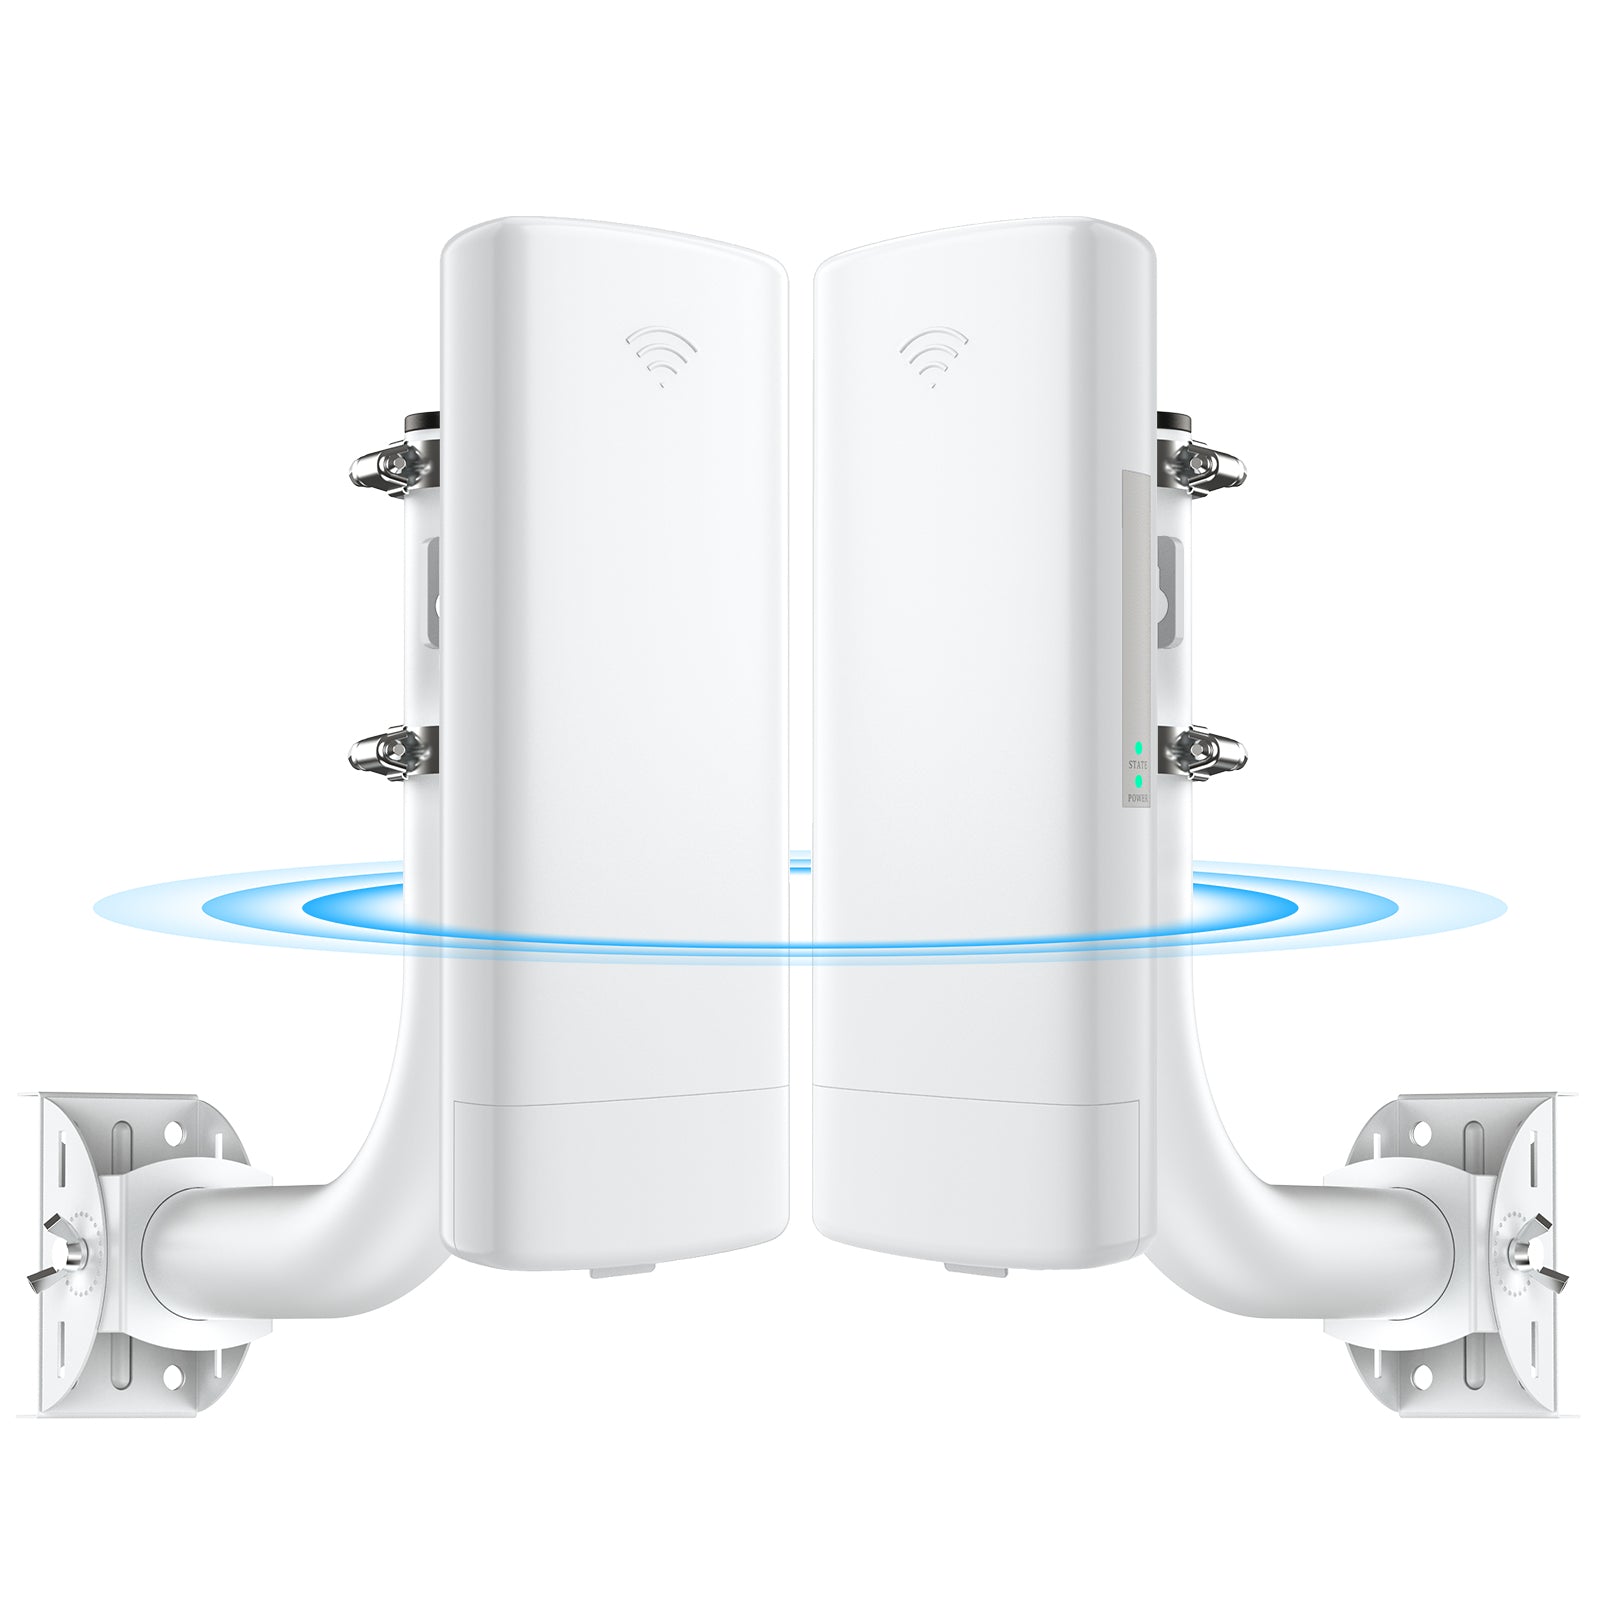 UeeVii  CPE71C Wireless Bridge With Bracket Mount, Point to Point 5.8G 300Mbps,2-Pack